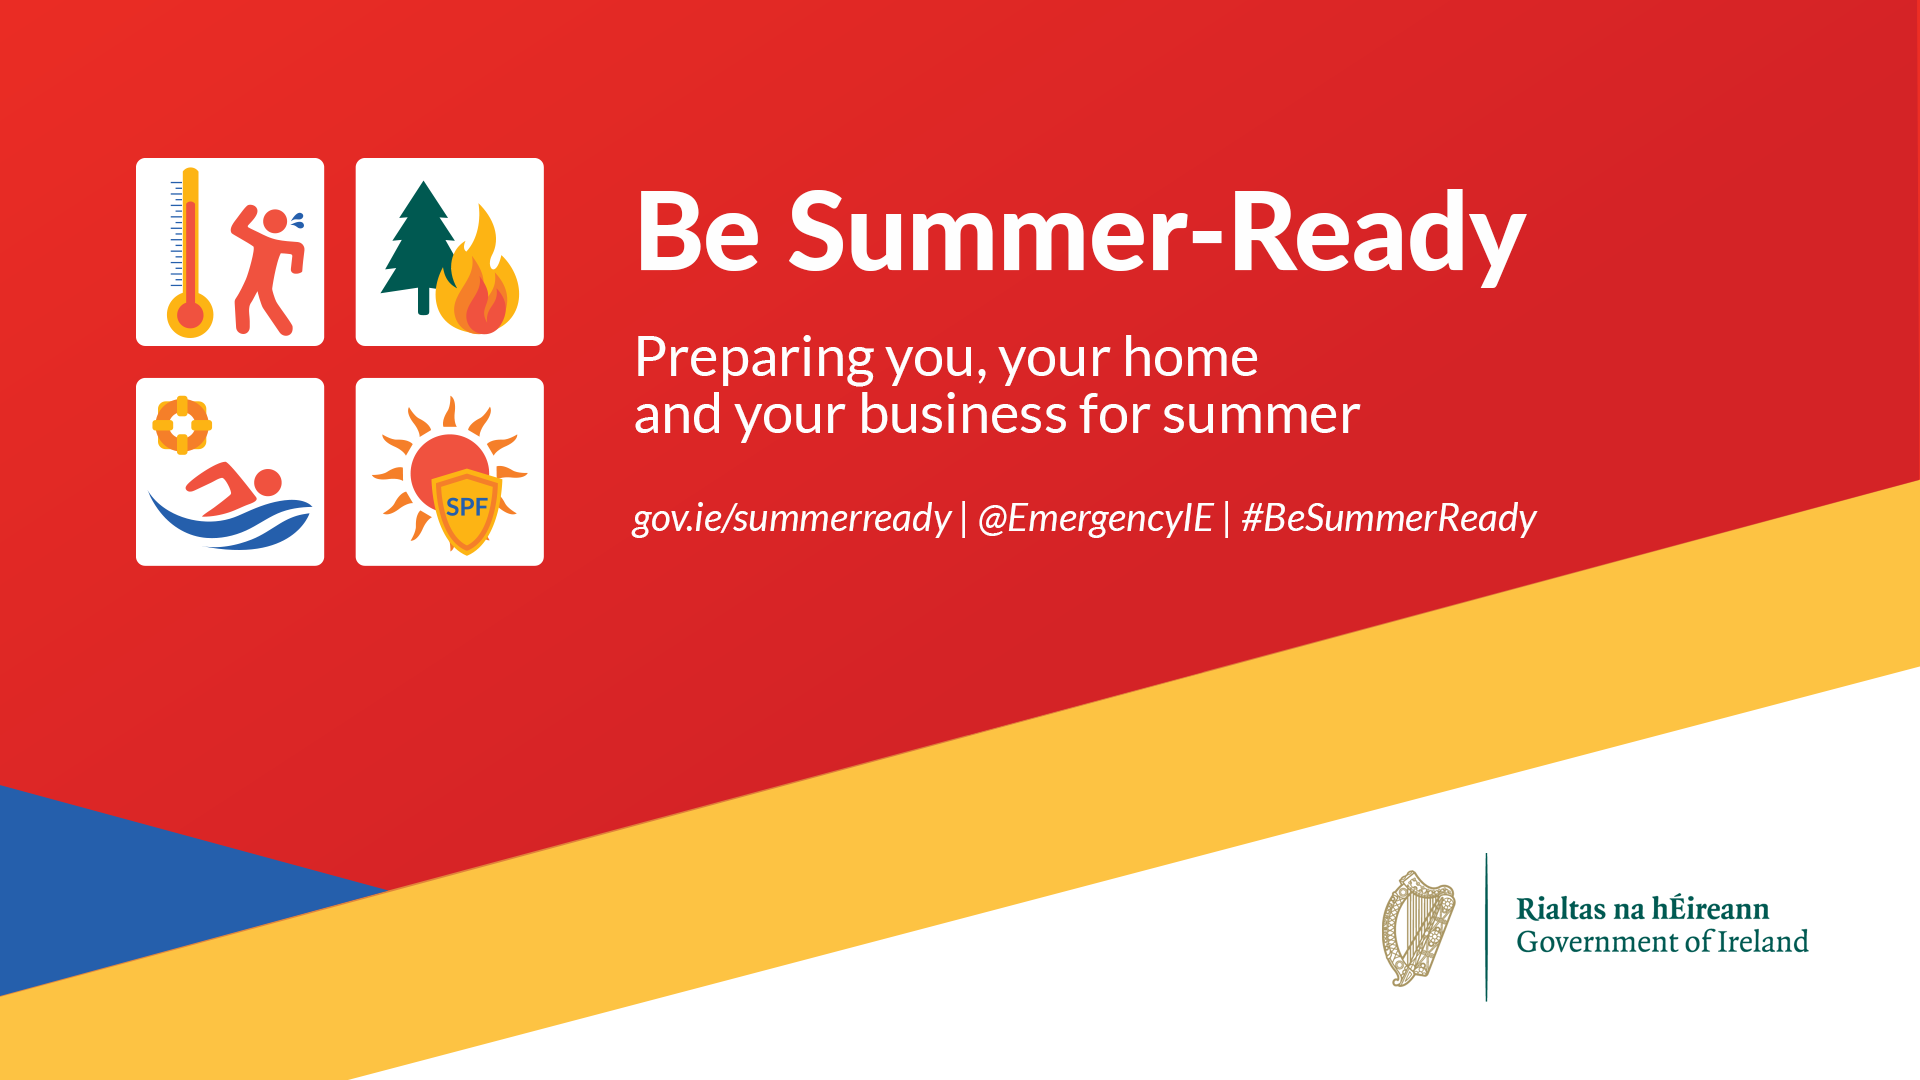 “Be Summer Ready” Campaign 2022